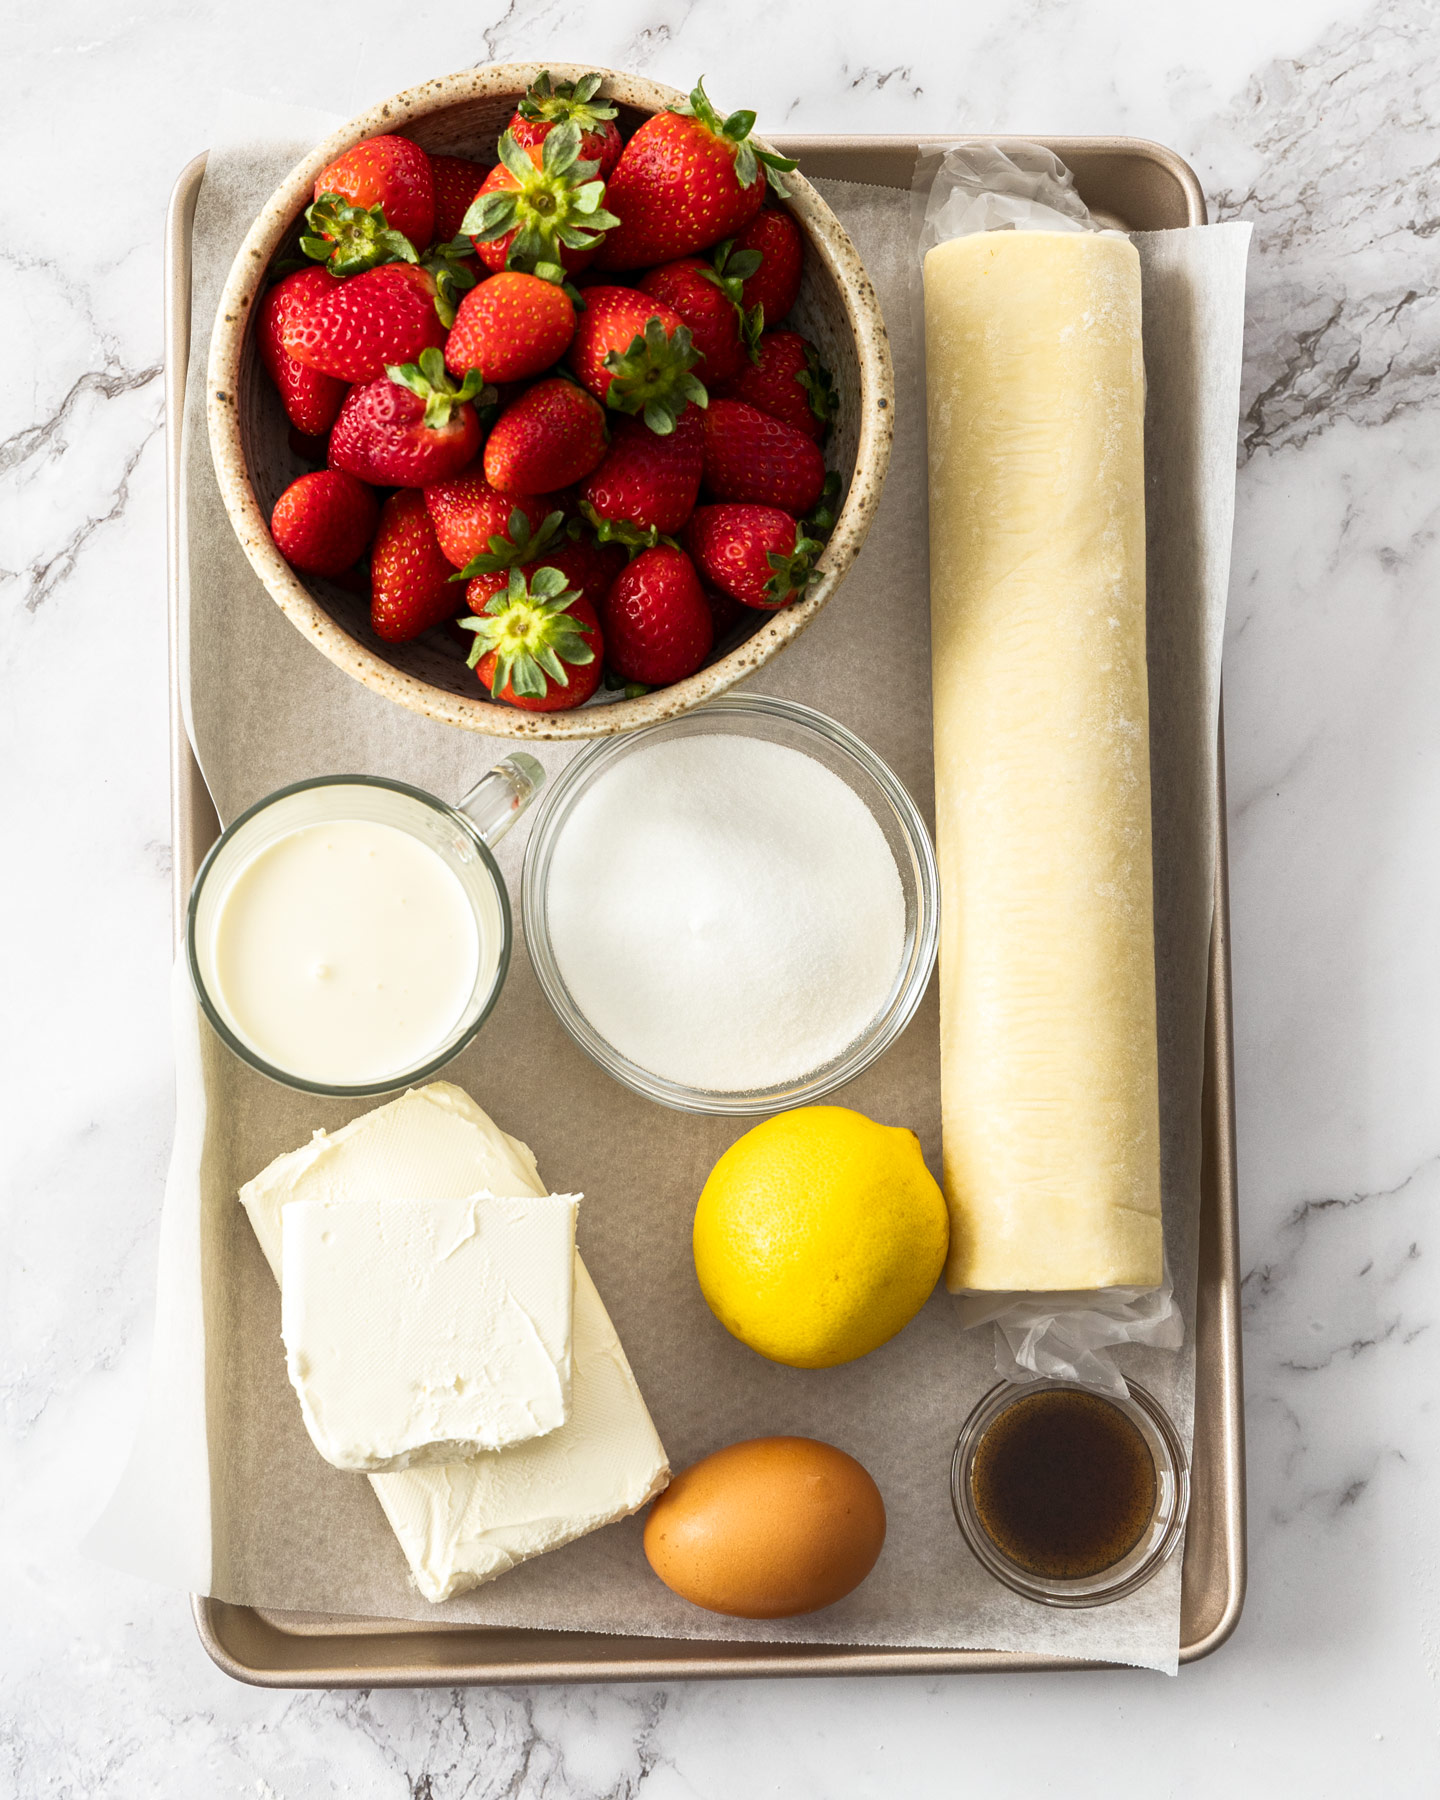 Ingredients for strawberry puff pastry tart.